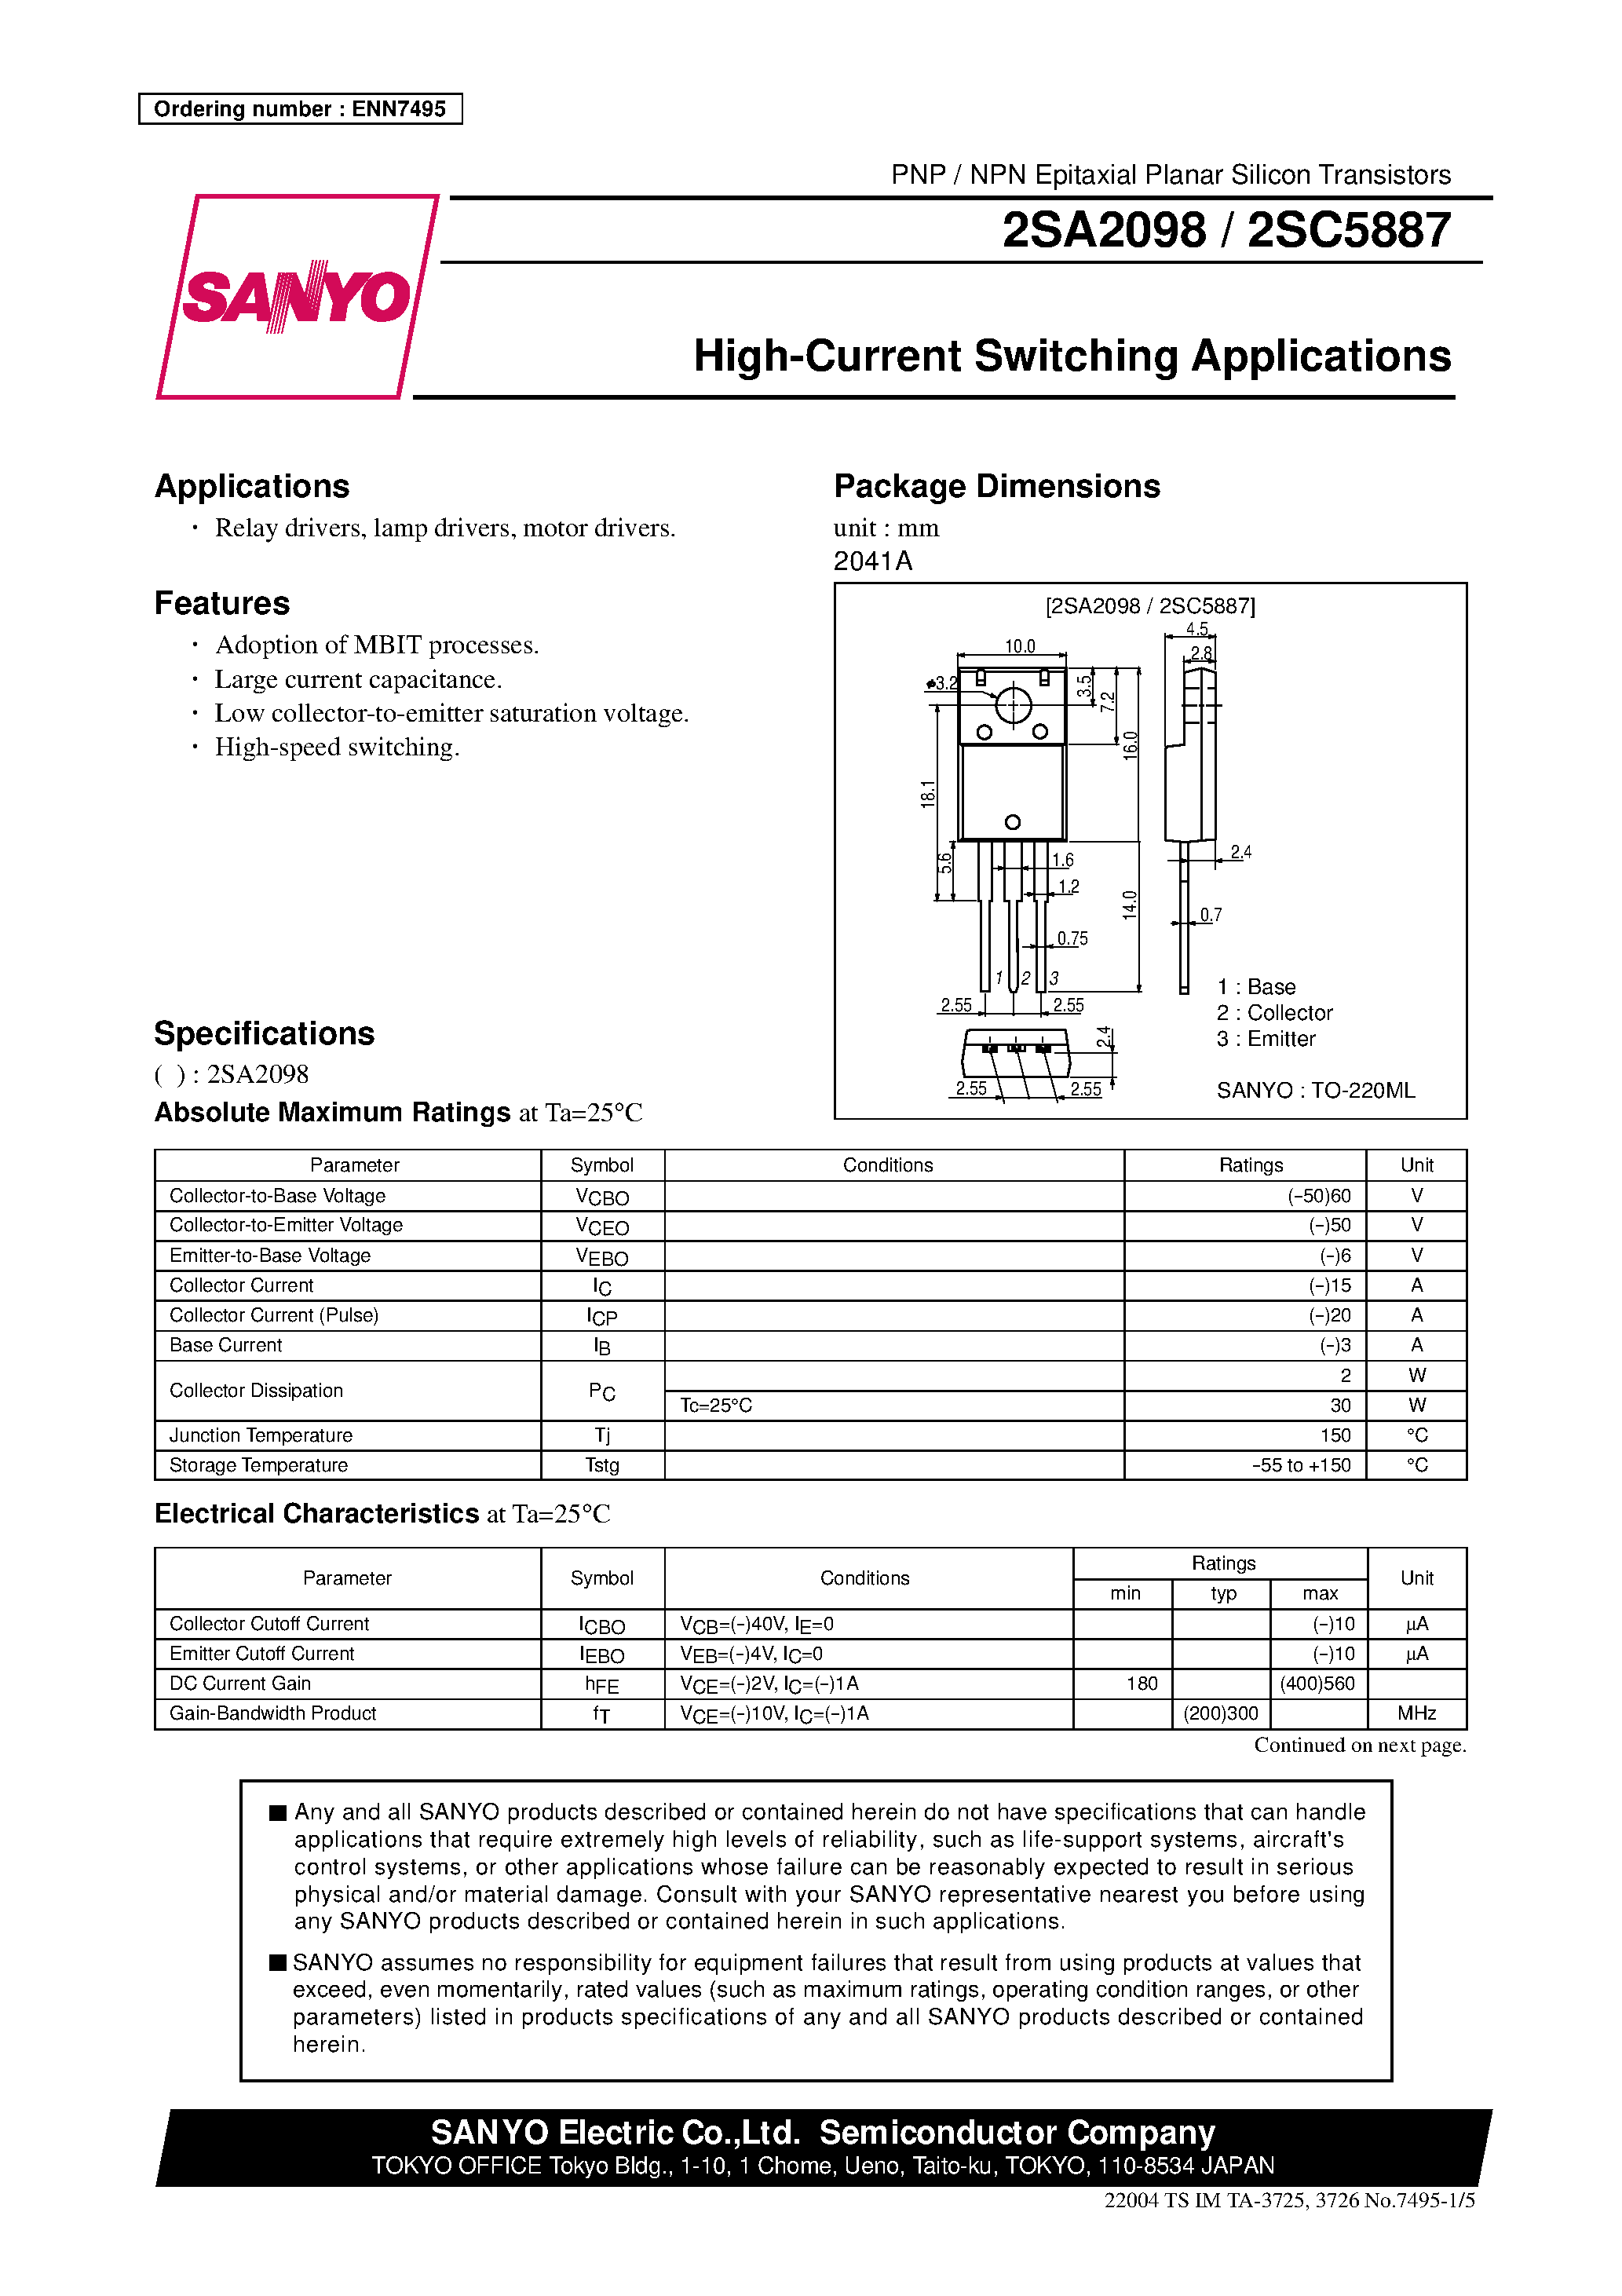 Datasheet 2SC2098 - (2SC2098 / 2SC5887) High-Current Switching Applications page 1